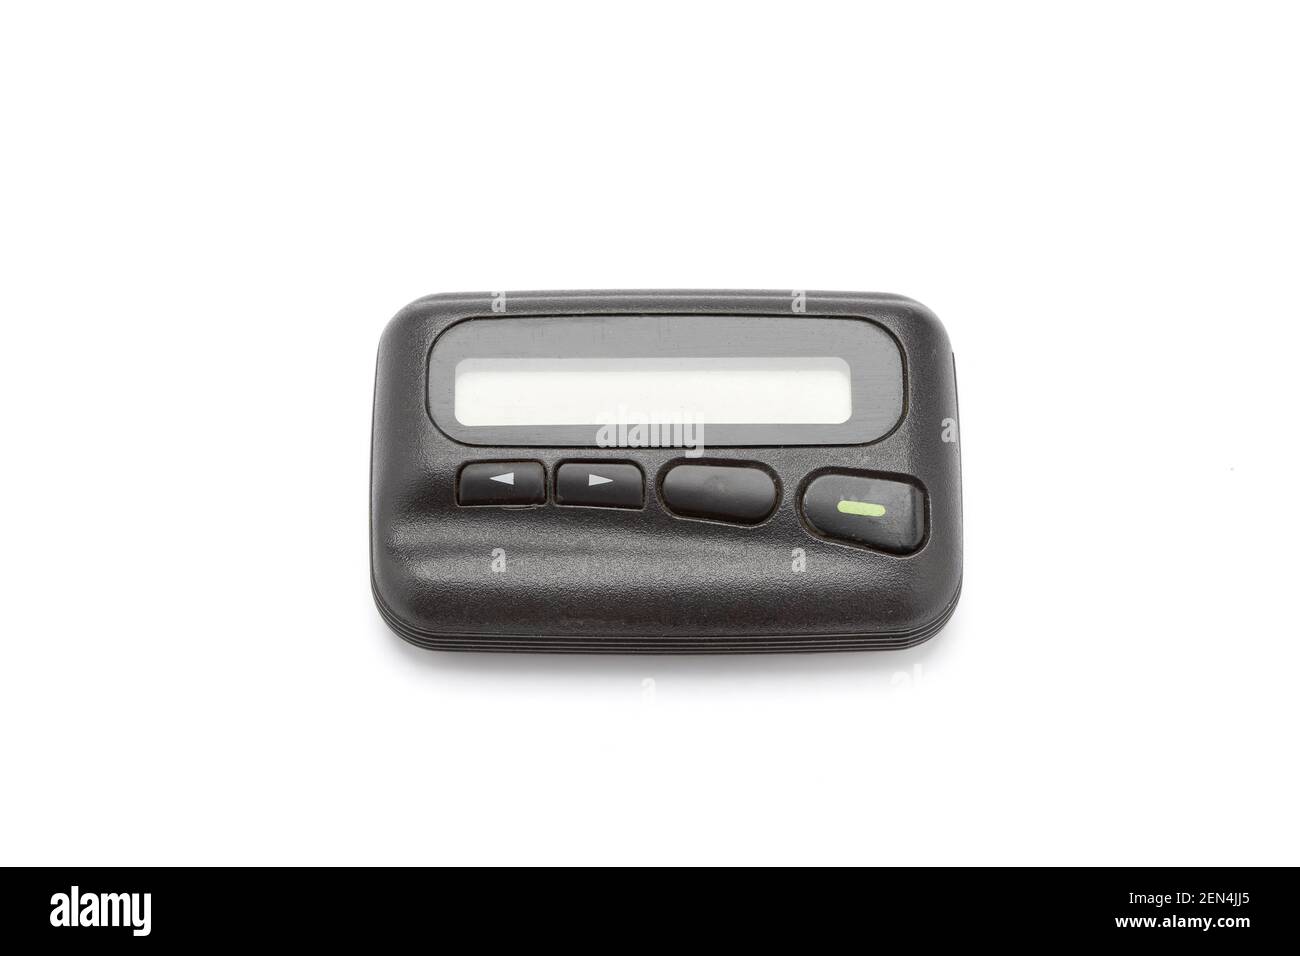 A pager or a beeper ,Pager can receive messages isolate on white background. Stock Photo